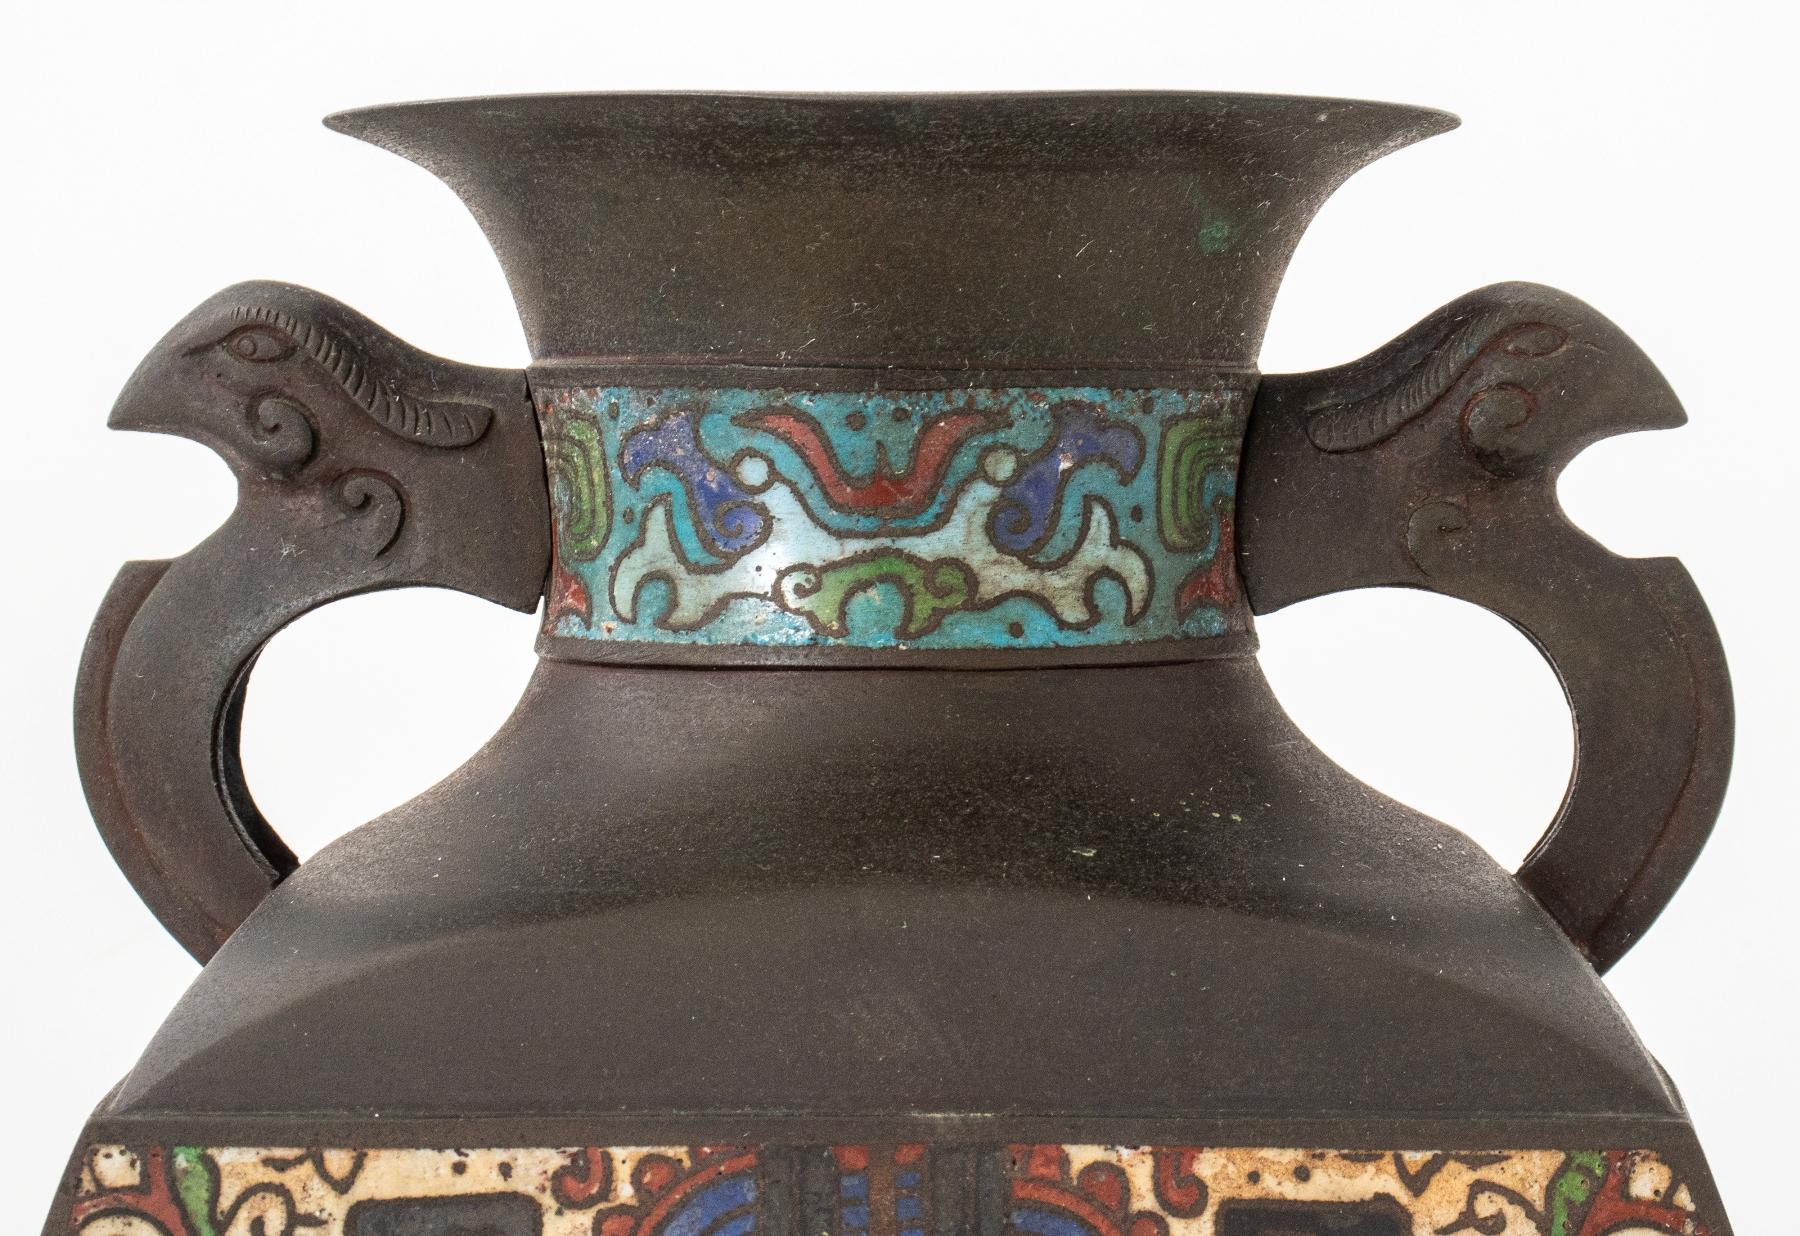 Japanese cloisonne enameled bronze vase in the Chinese style with four sides, and rabbit handles, the sides enameled in imitation of Shang period examples.

Dimensions: 14.25